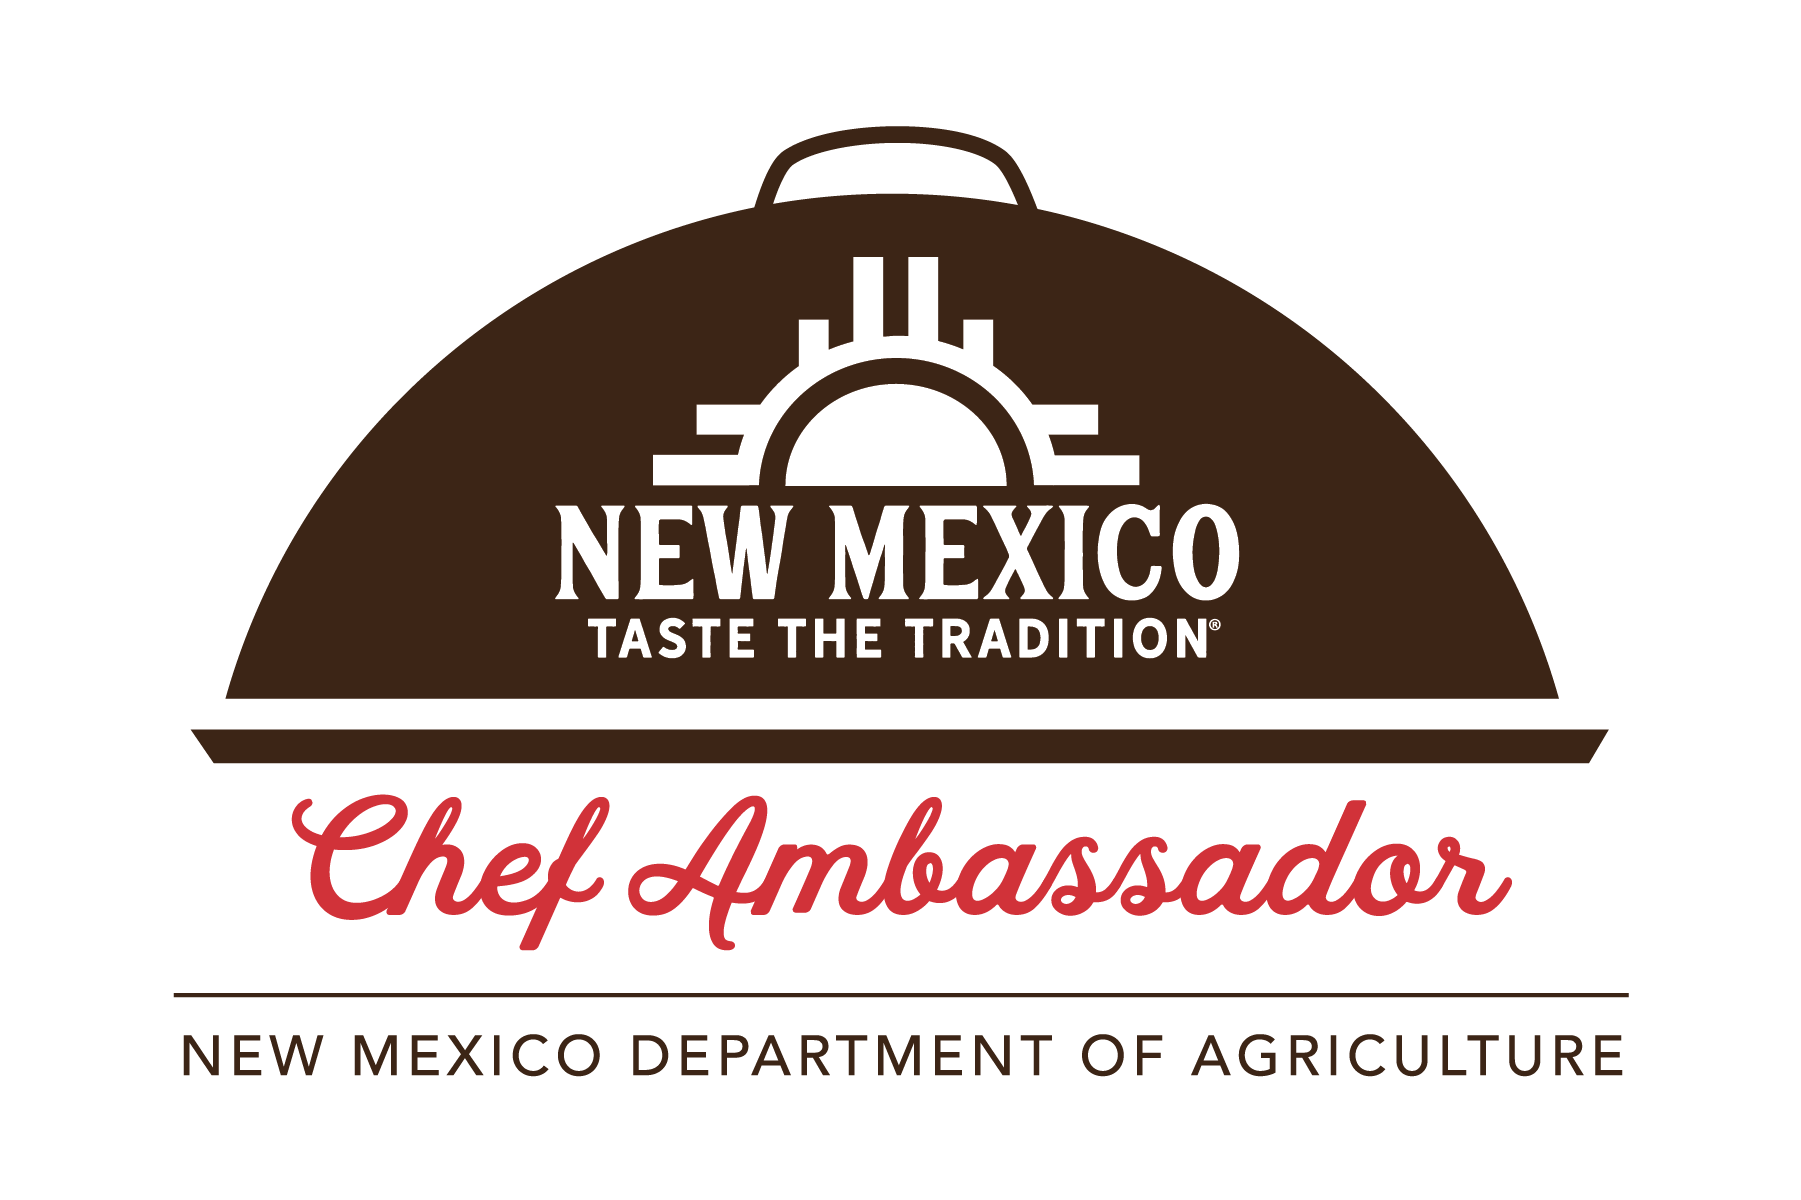 A brown serving dish with a rounded lid with a handle on top. The lid contains the New Mexico Taste the Tradition logo with a sun and sun rays in white font. Under the serving dish are the words “Chef Ambassador” in red cursive font, with a brown horizontal line underneath, with NEW MEXICO DEPARTMENT OF AGRICULTURE in all caps, brown font under the line.